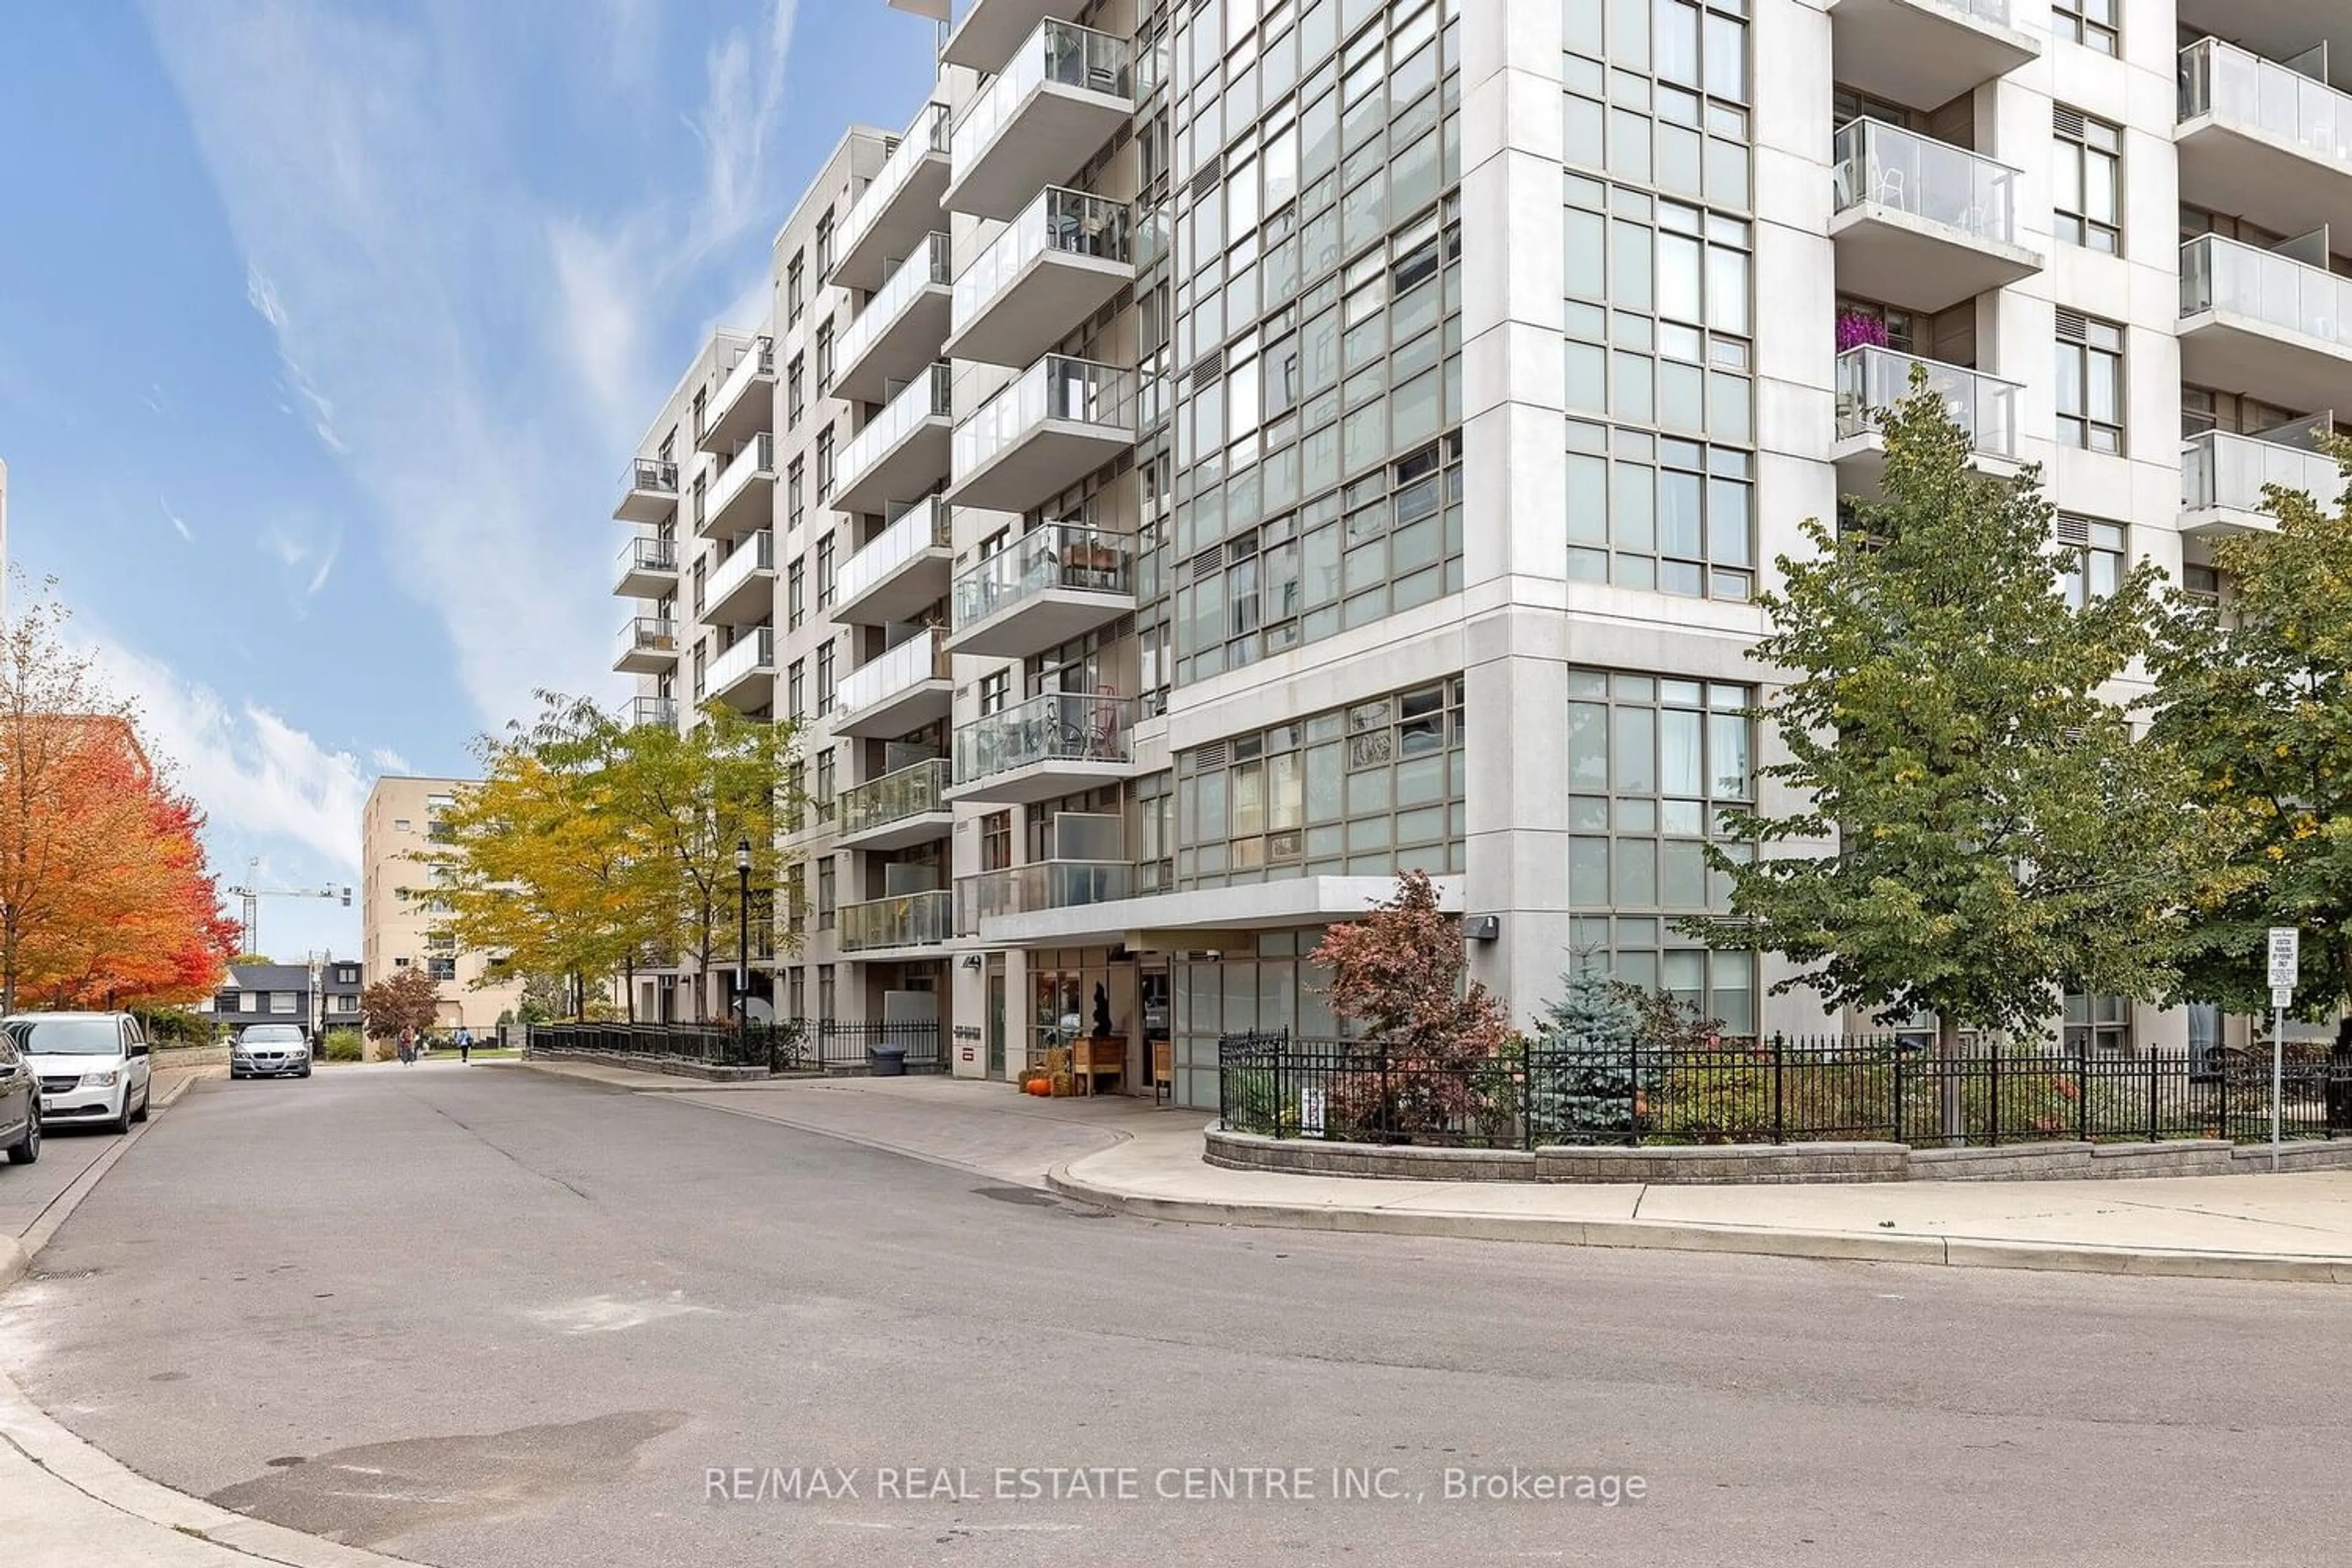 A pic from exterior of the house or condo for 812 Lansdowne Ave #316, Toronto Ontario M6H 4K5